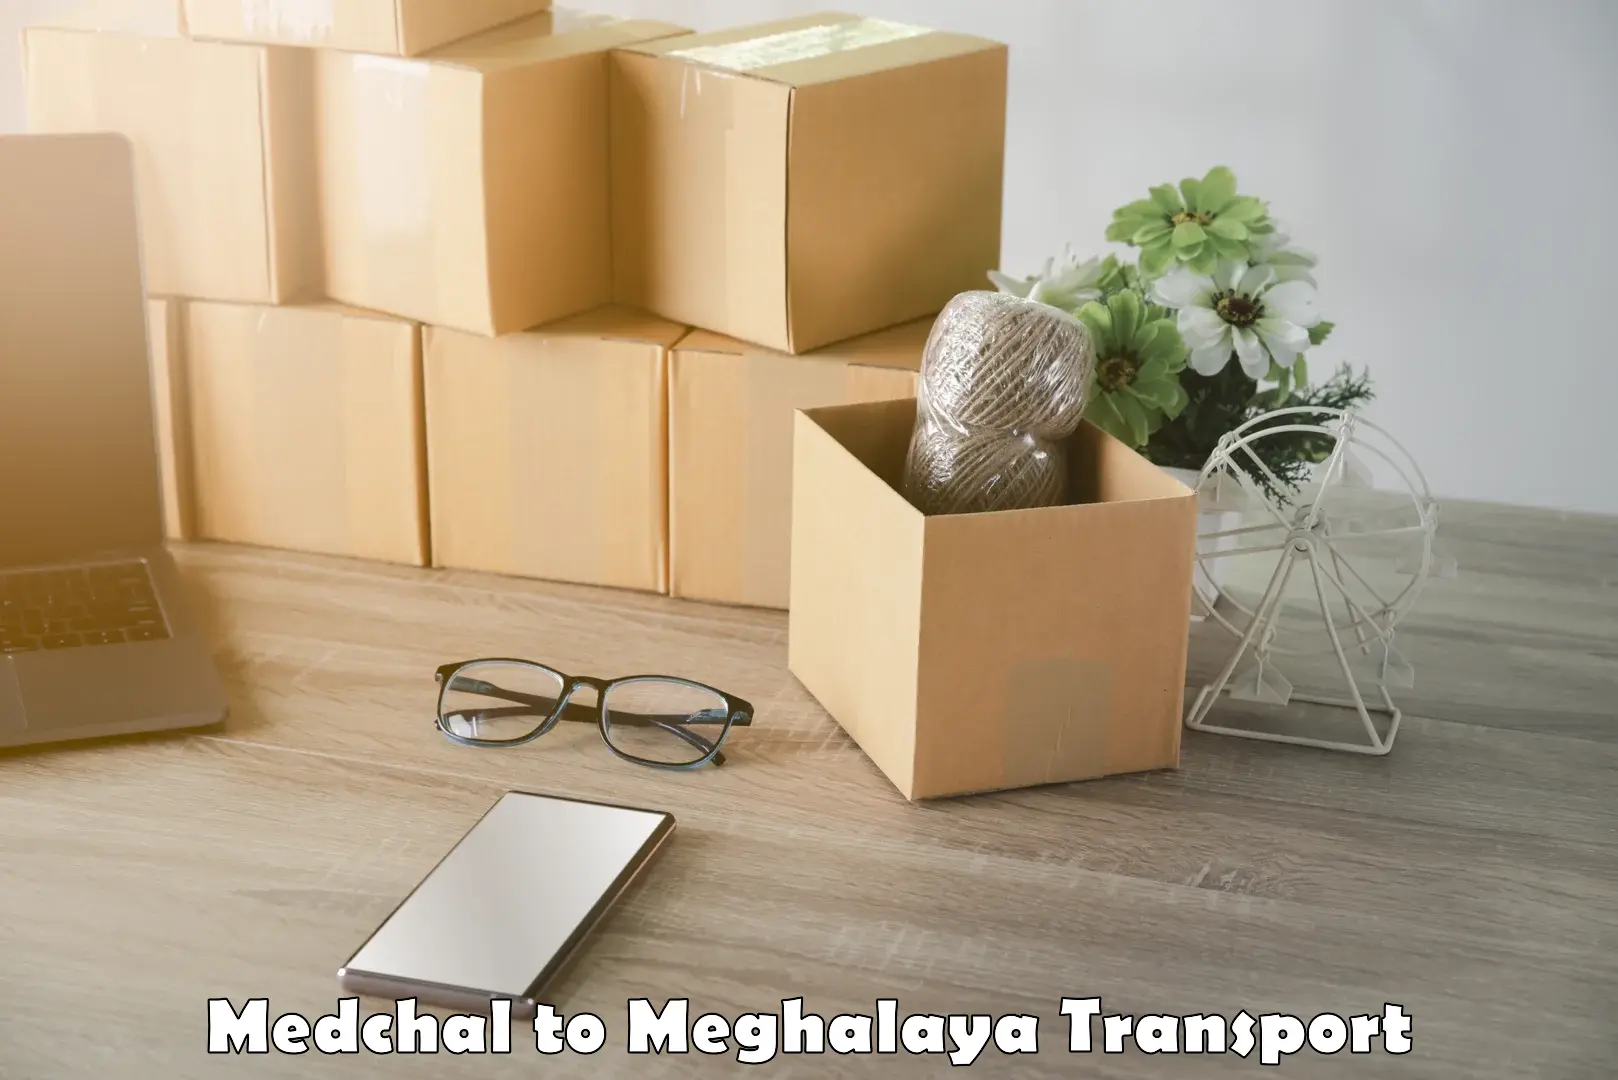 Luggage transport services Medchal to Shillong